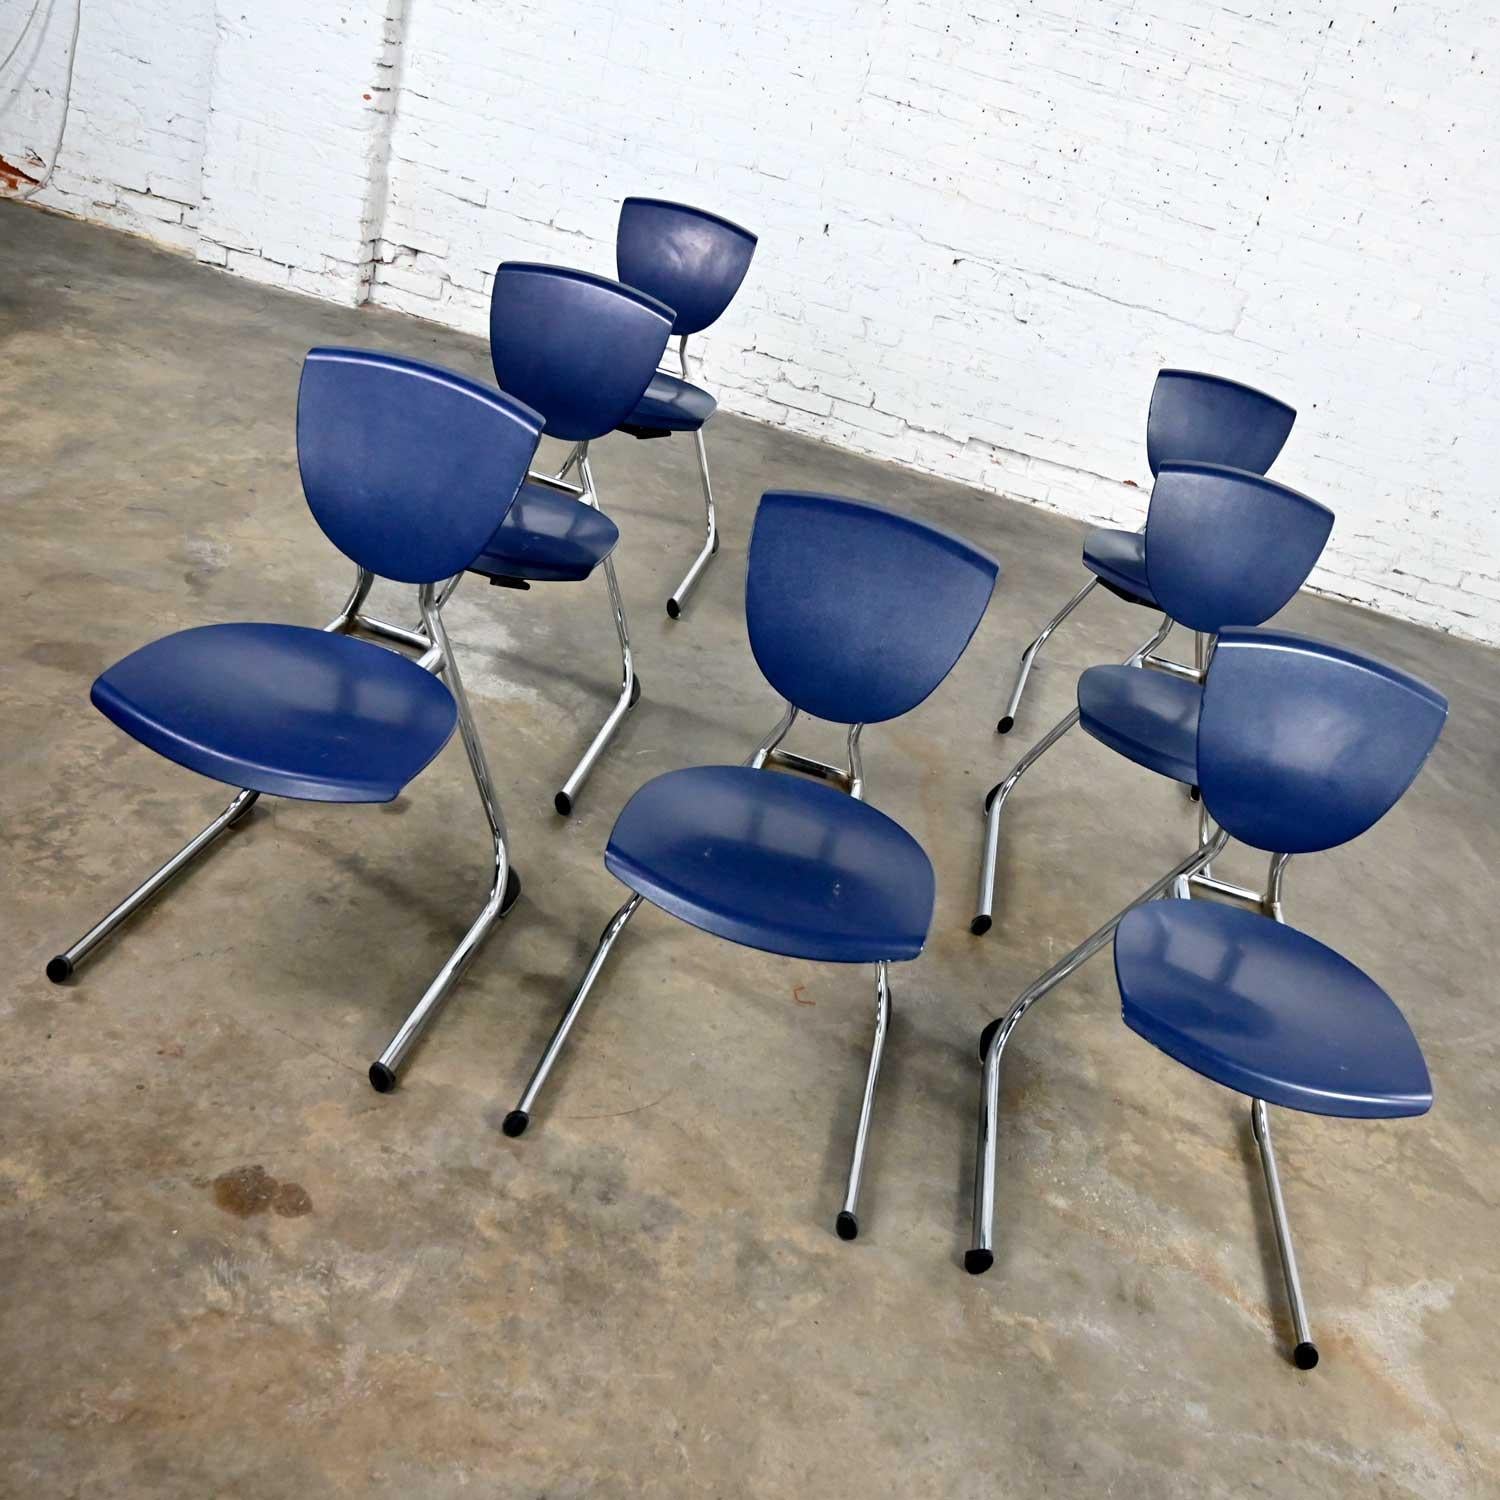 Awesome vintage modern dark blue plastic & chrome reverse cantilever Intellect dining chairs by Krueger International (a.k.a.) KI Seating 7 total. Beautiful condition, keeping in mind that these are vintage and not new so will have signs of use and